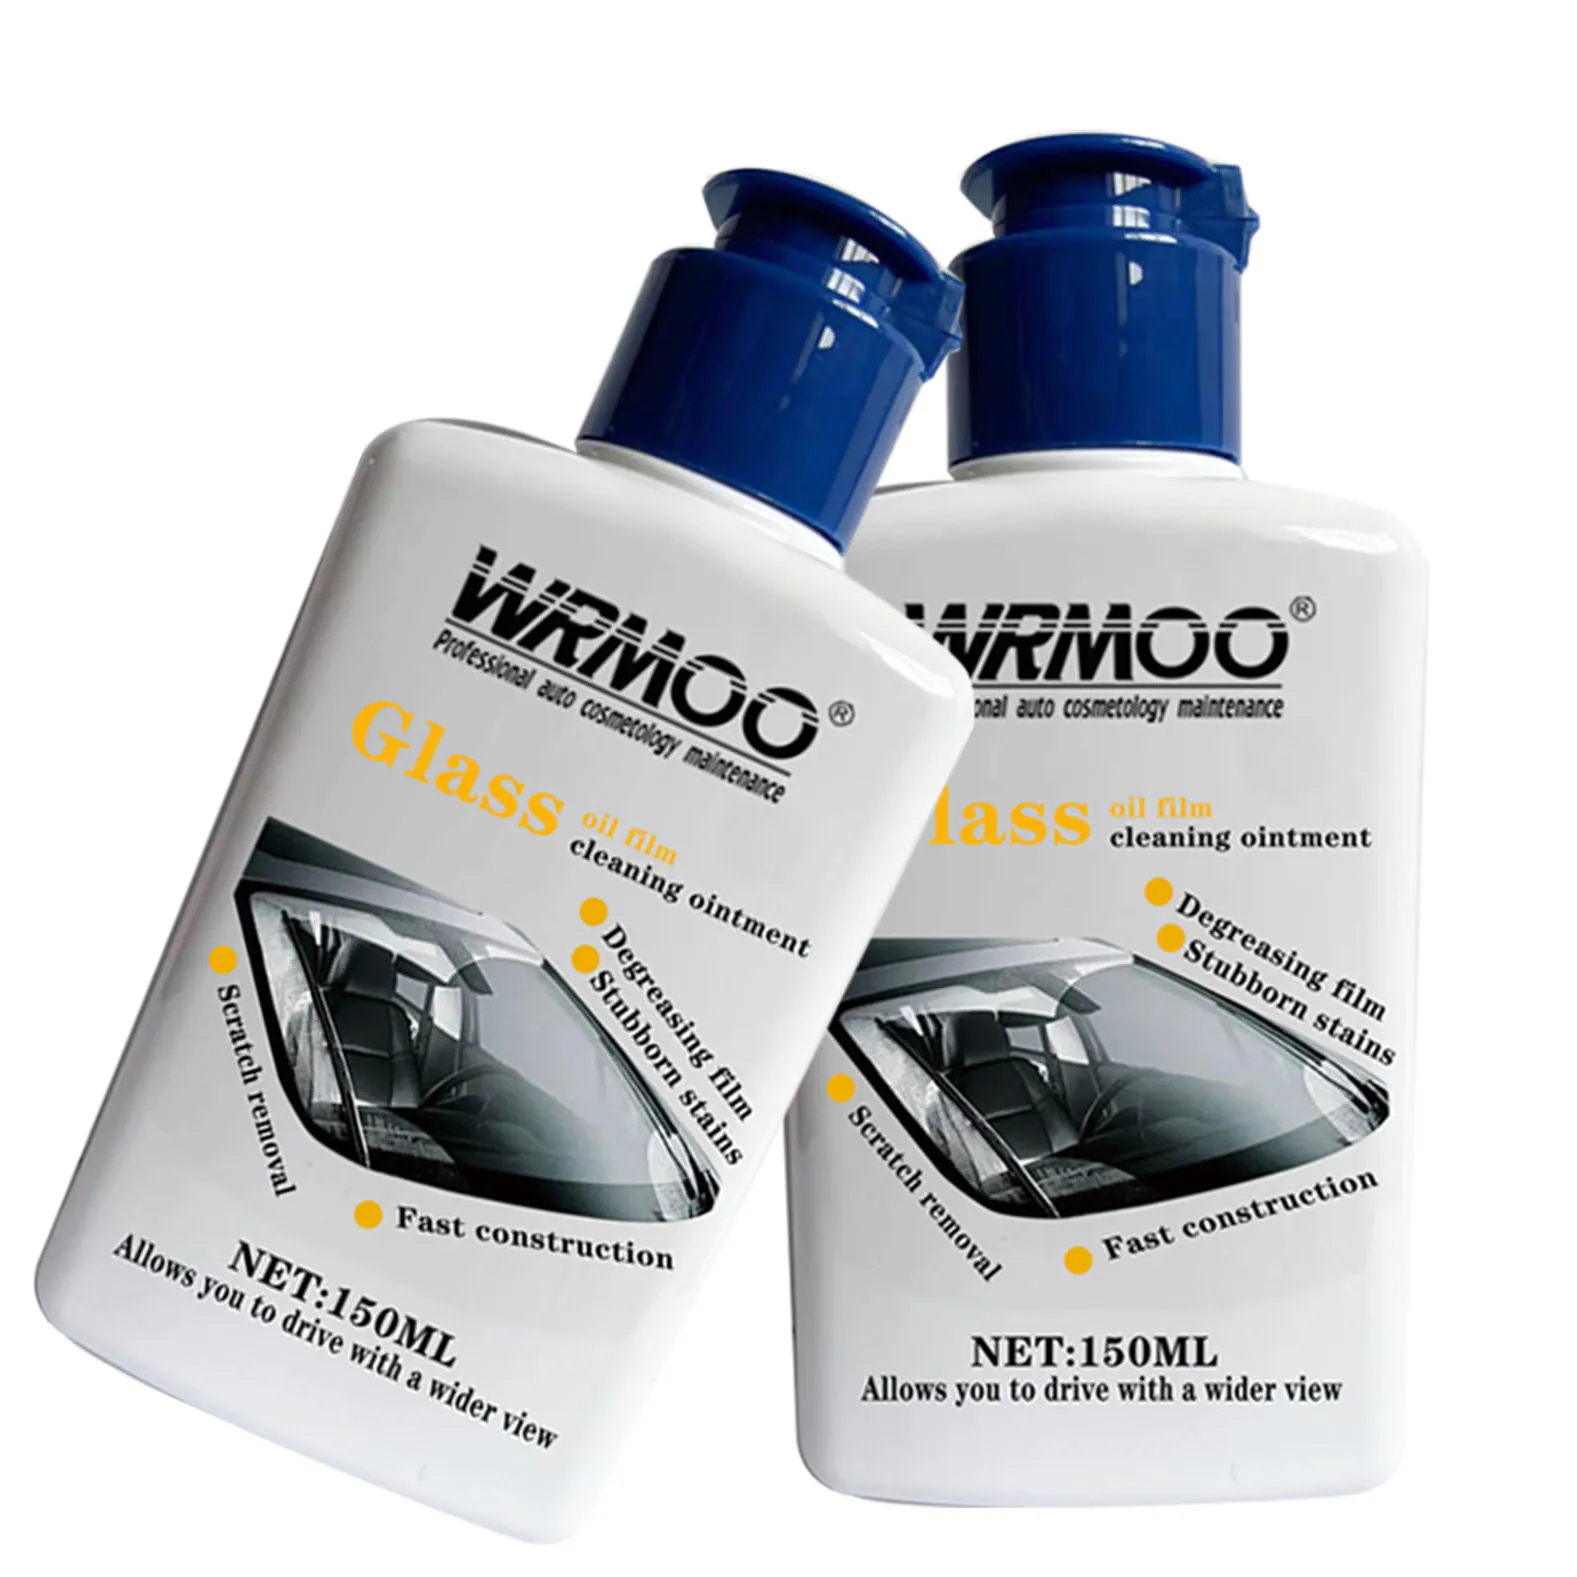 windshield cleaner oil film remover to